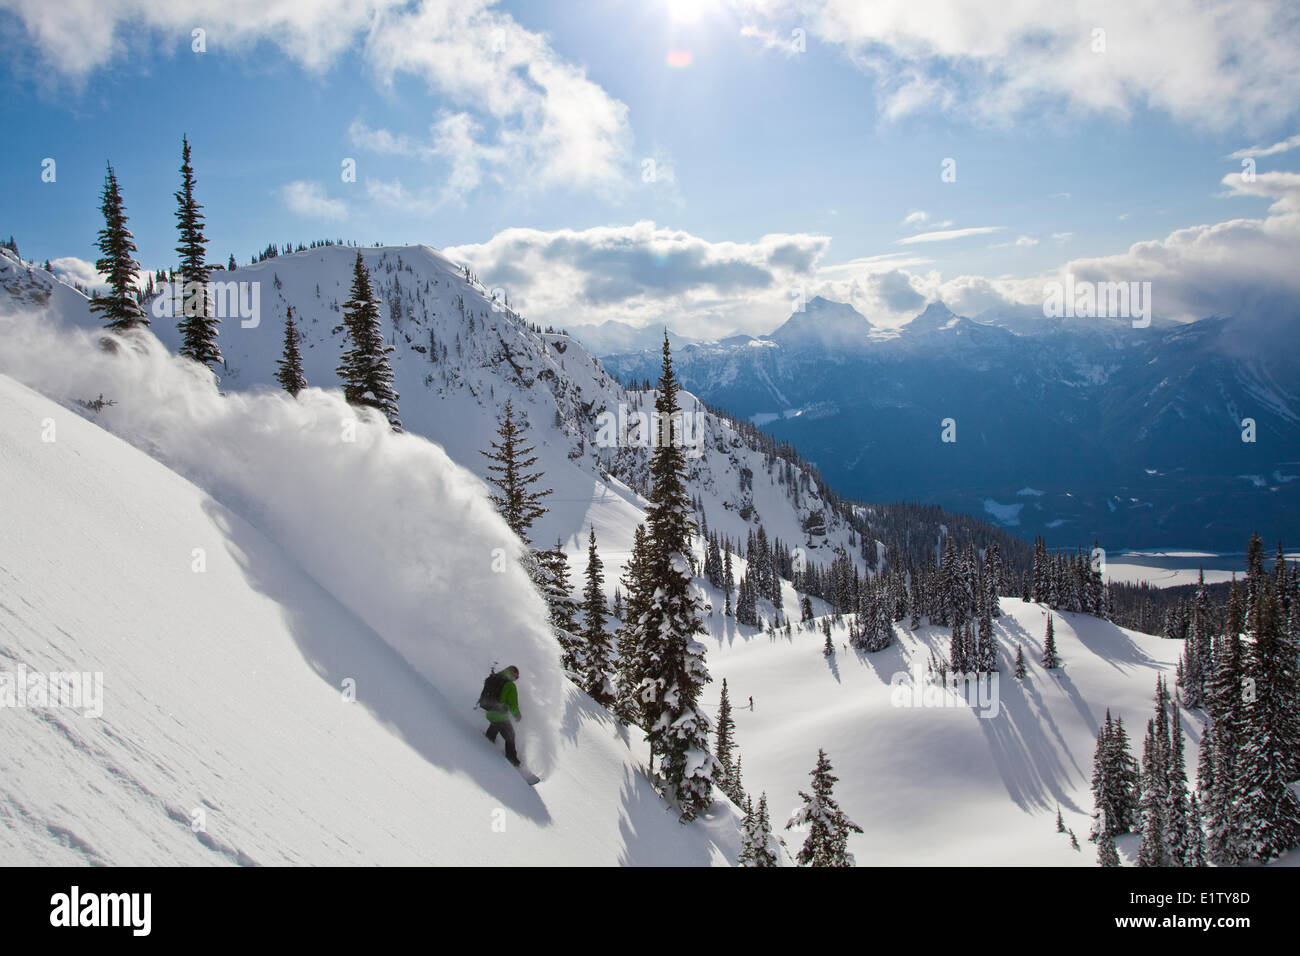 A male backcountry snowboarder sprays some powder in the Revelstoke Mountain Backcountry, BC Stock Photo